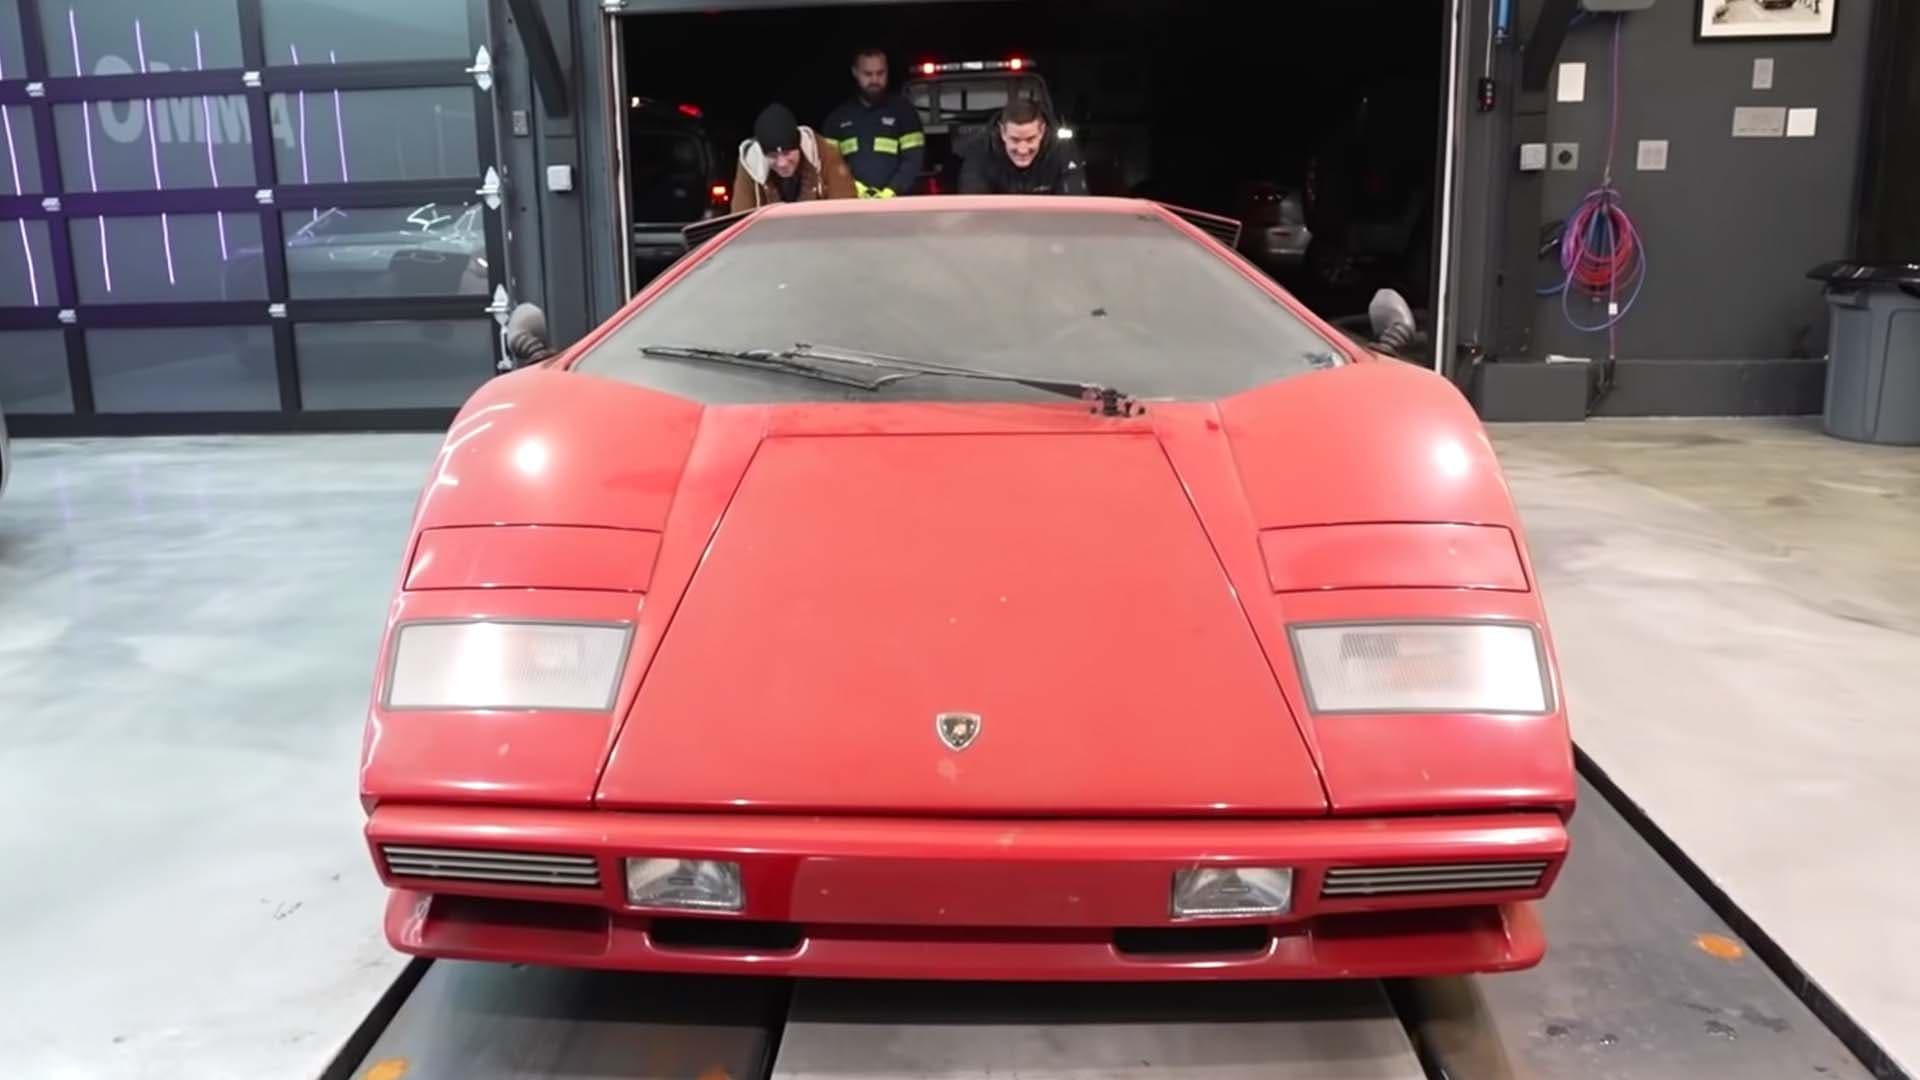 You Won’t Believe How Much Mouse Pee Is in This 1985 Lamborghini Countach